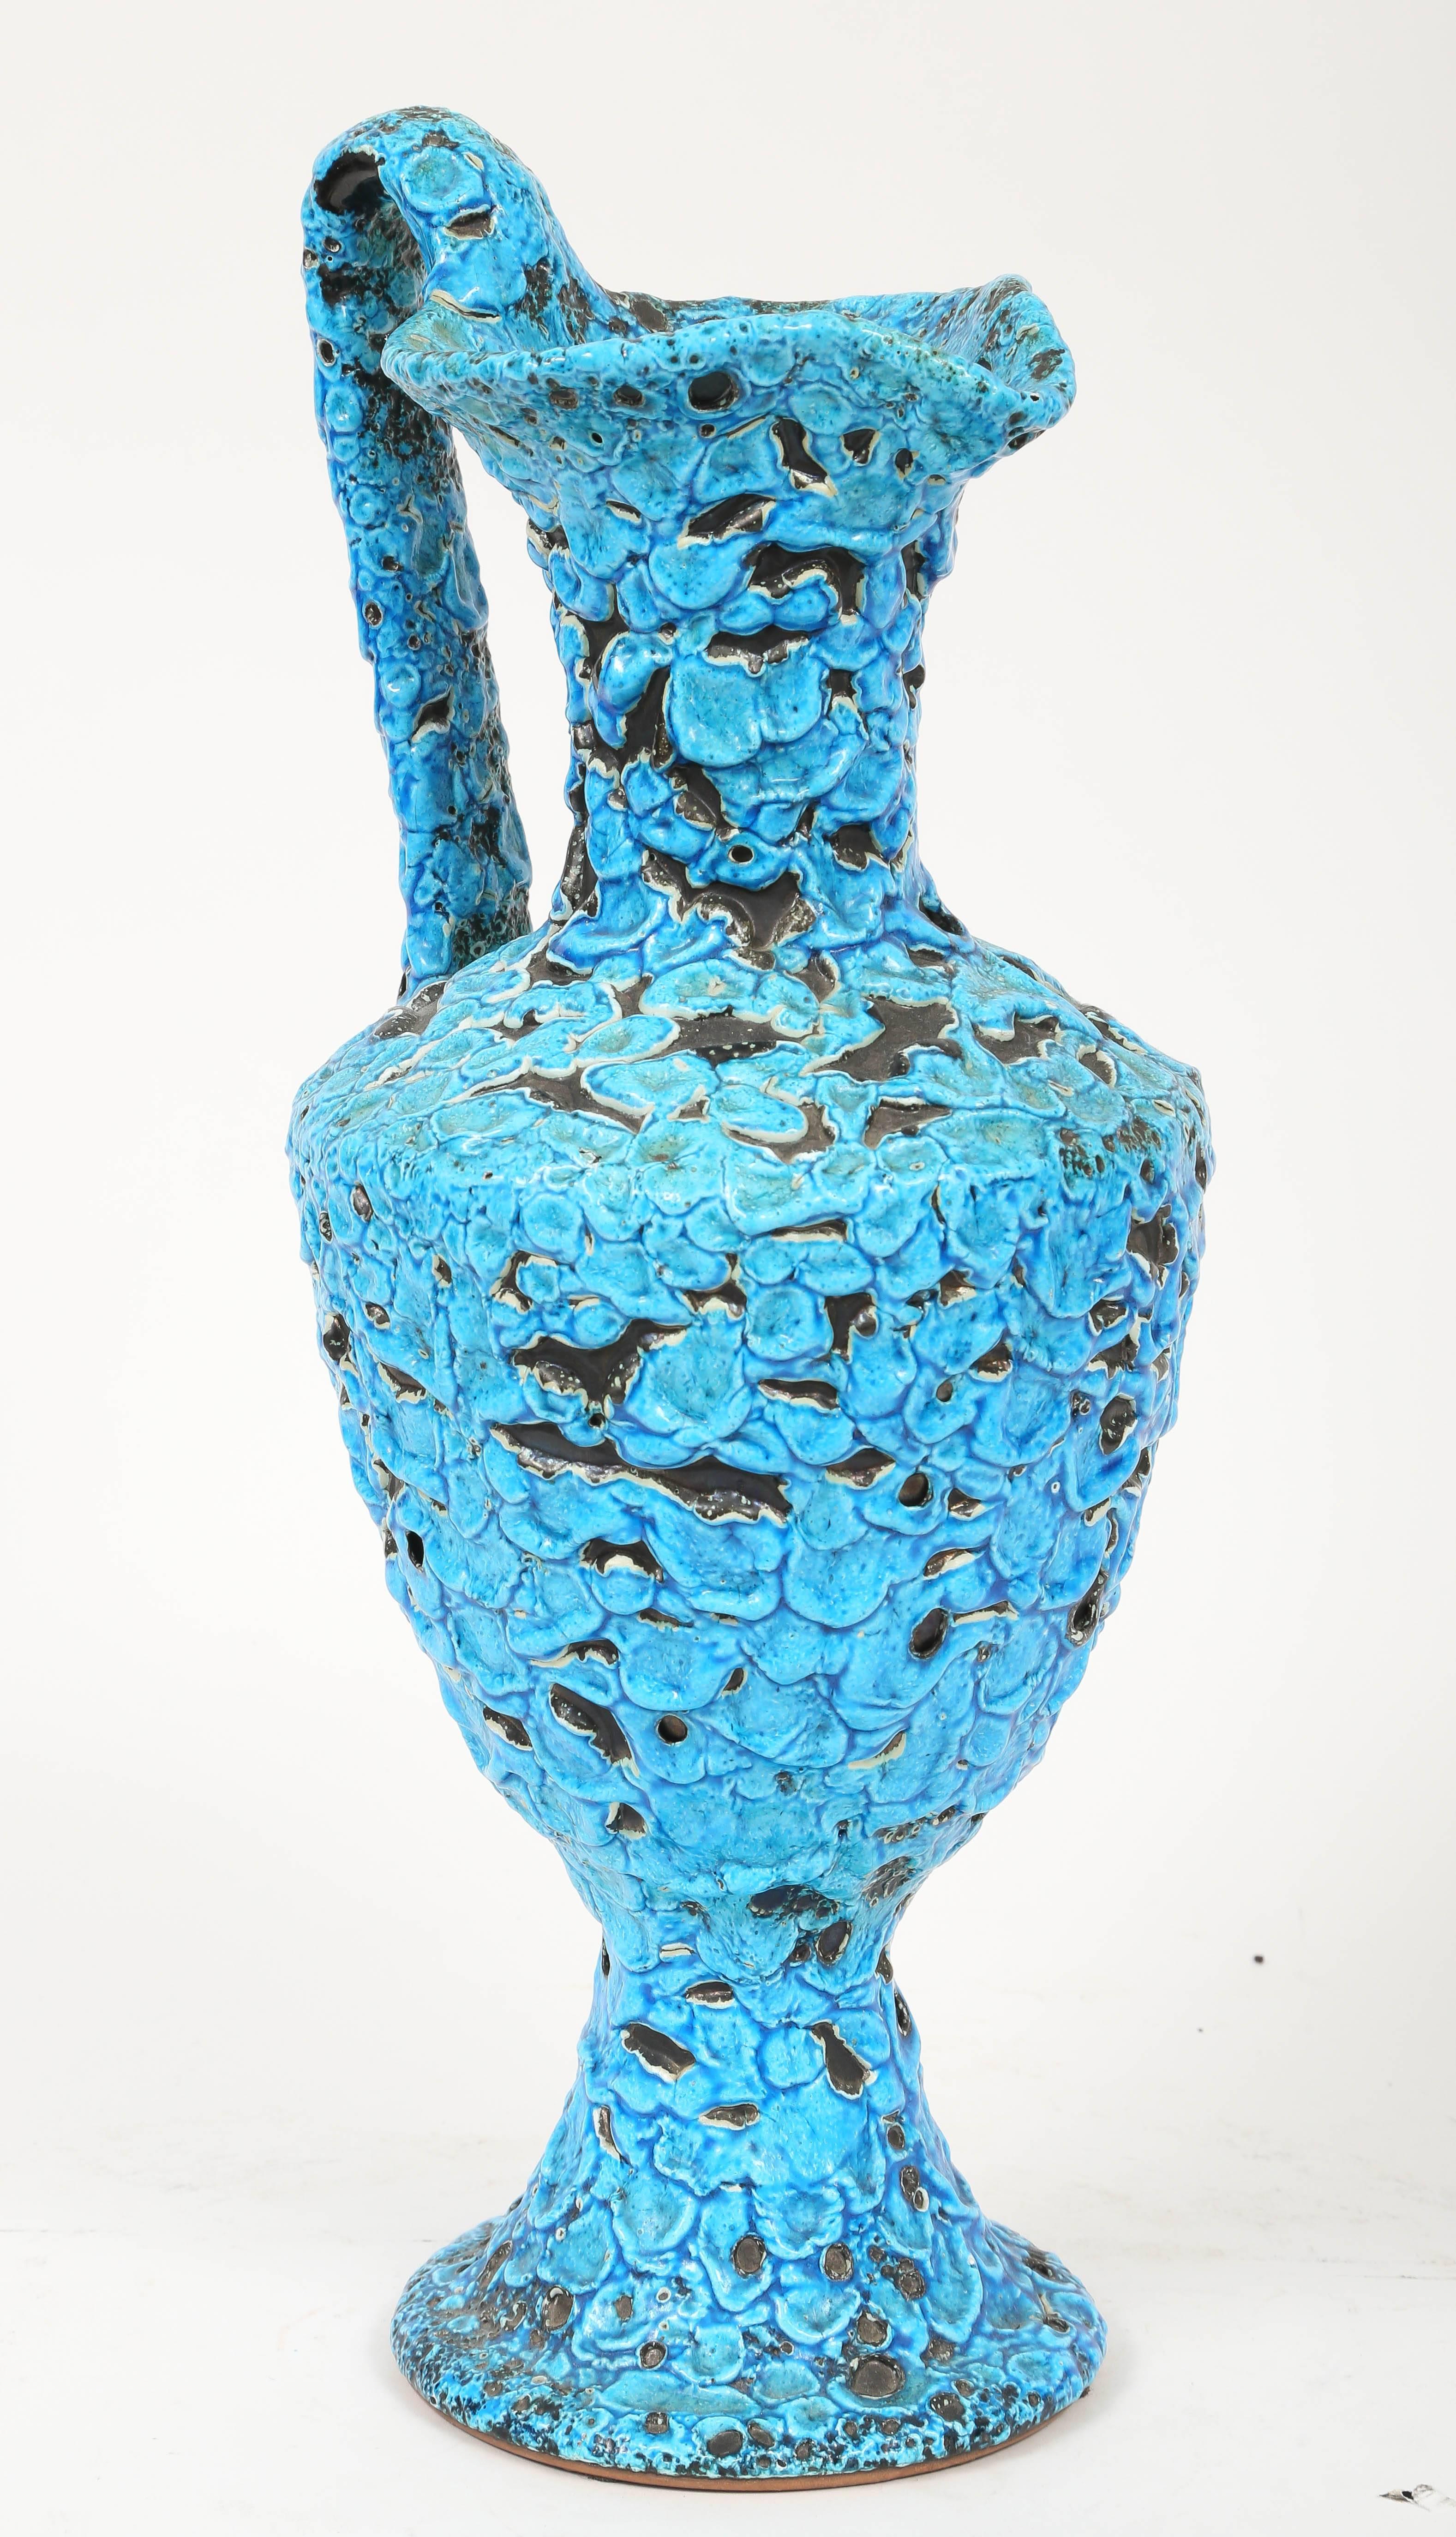 The distinctive glaze on this tall pitcher vase was developed by Charles Cart the founder of the Le Cyclope Pottery brand in Annecy-le-Vieux in the Haute Savoie area of France. The firing process reveals the black layer below the turquoise glaze in